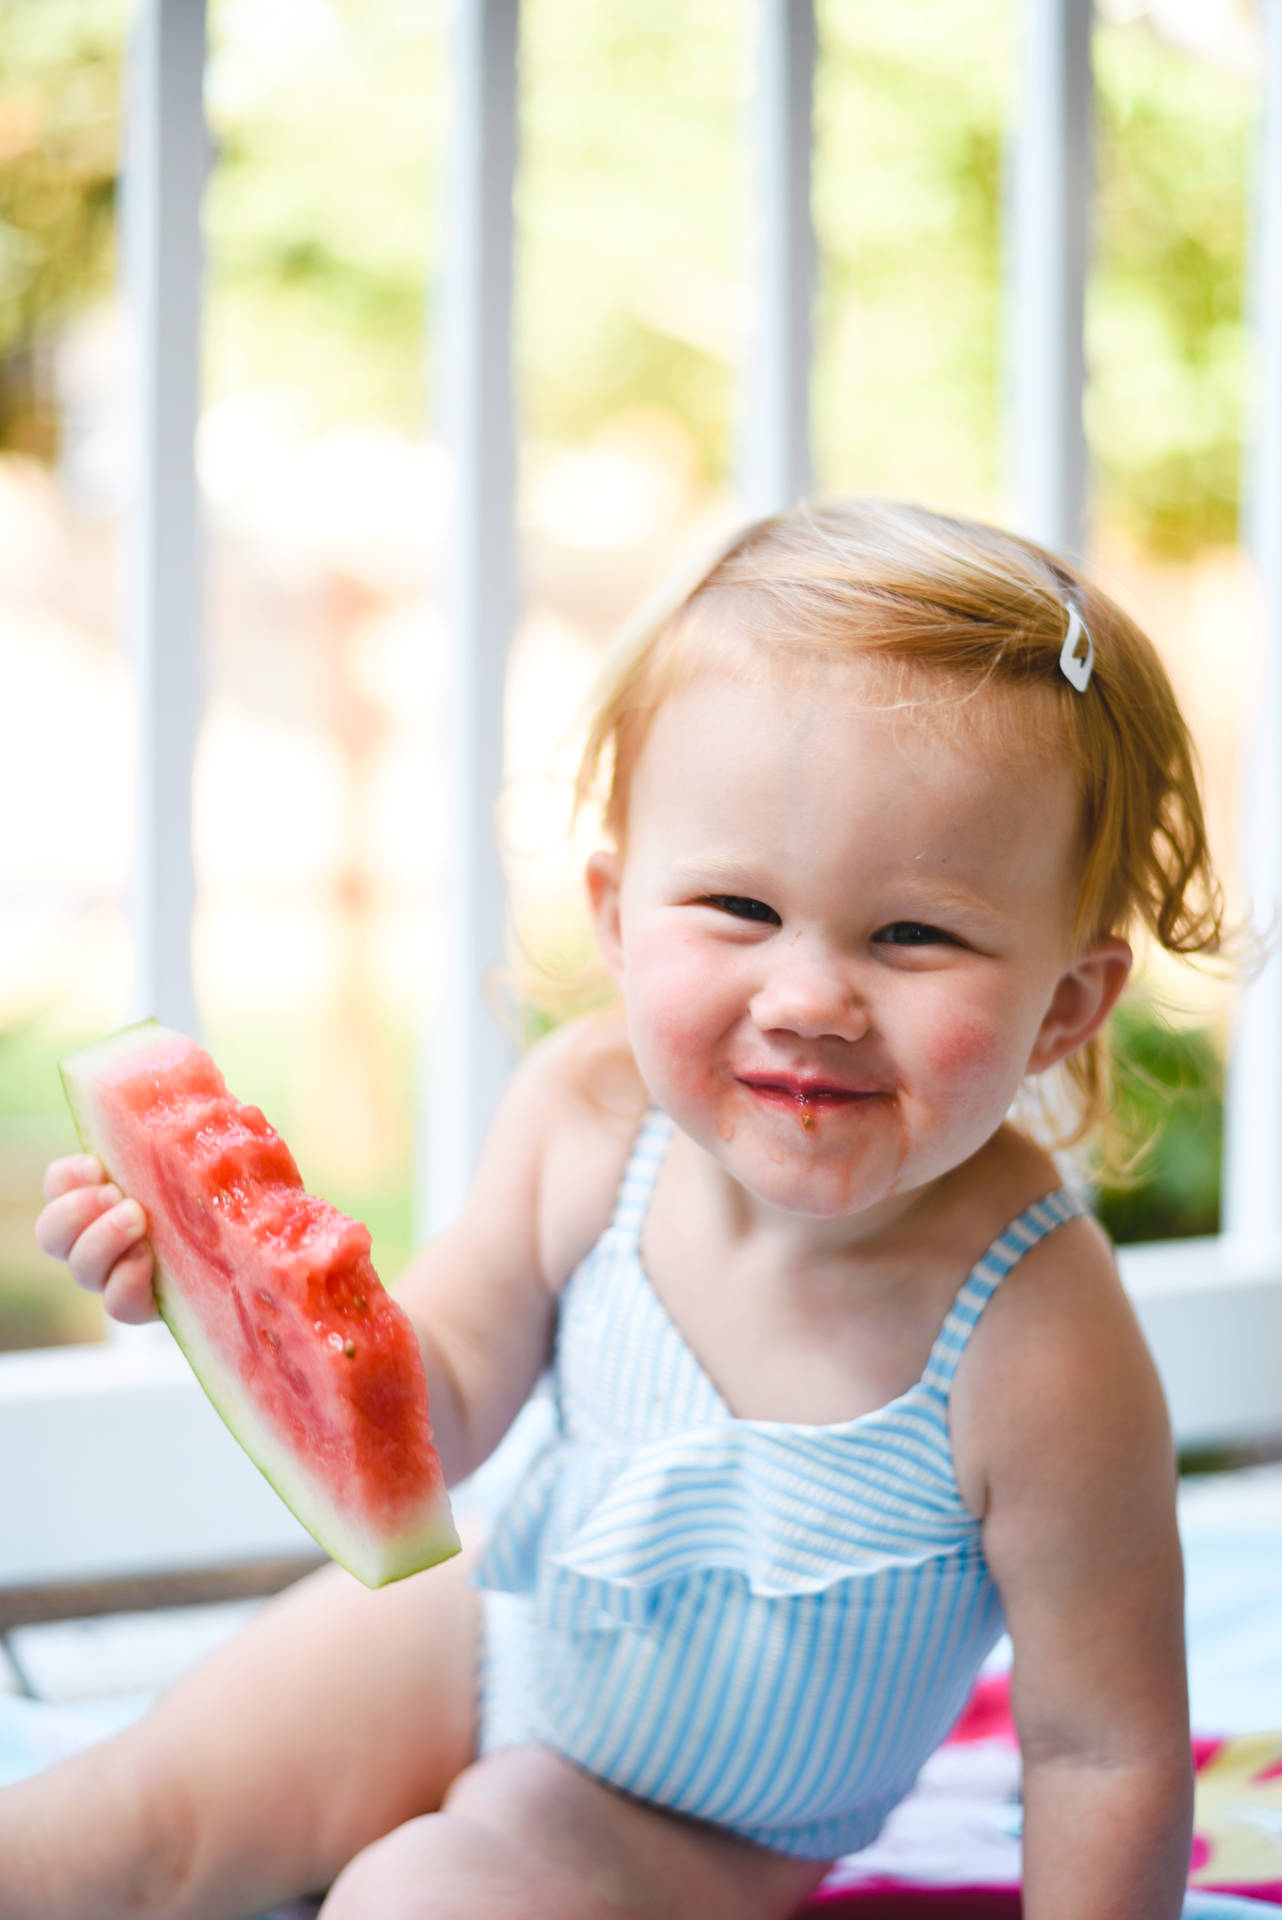 Smiling Baby With Watermelon Background